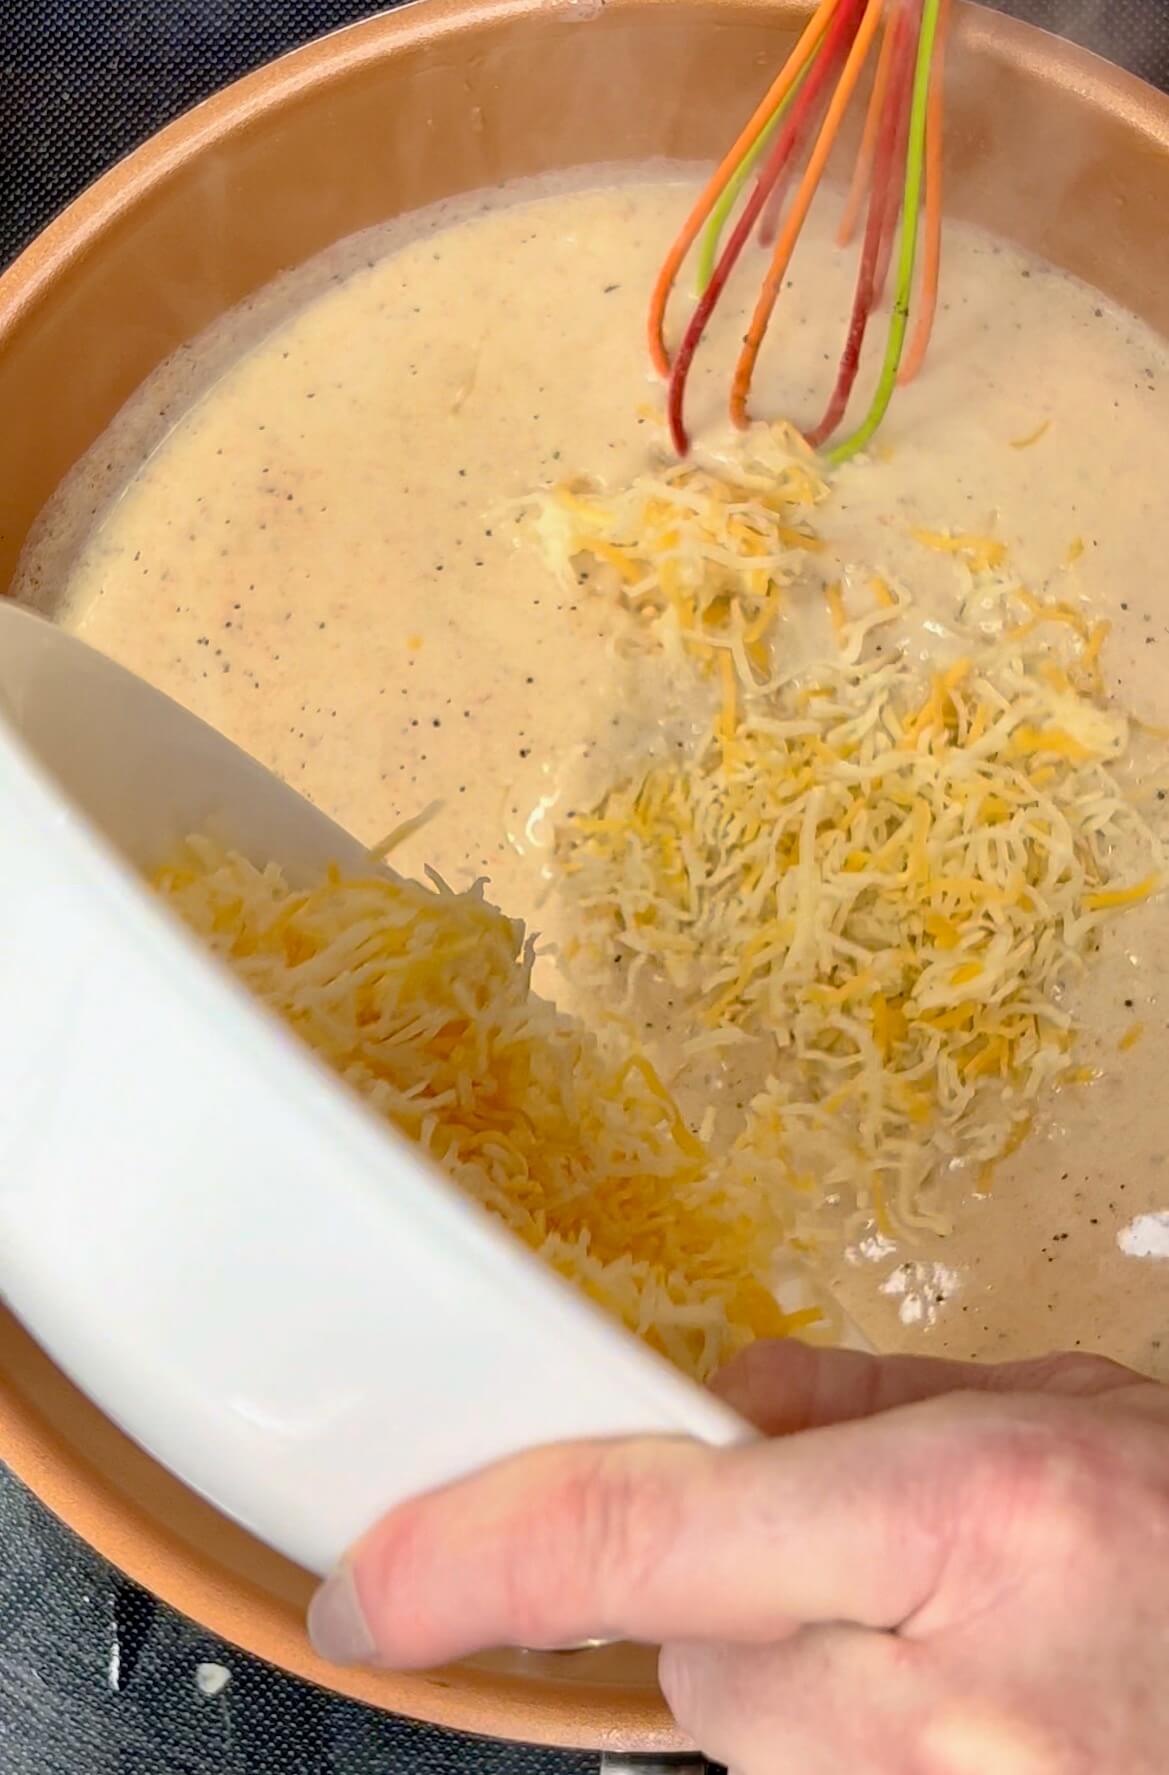 Add shredded fiesta cheese to the sauce preparations.